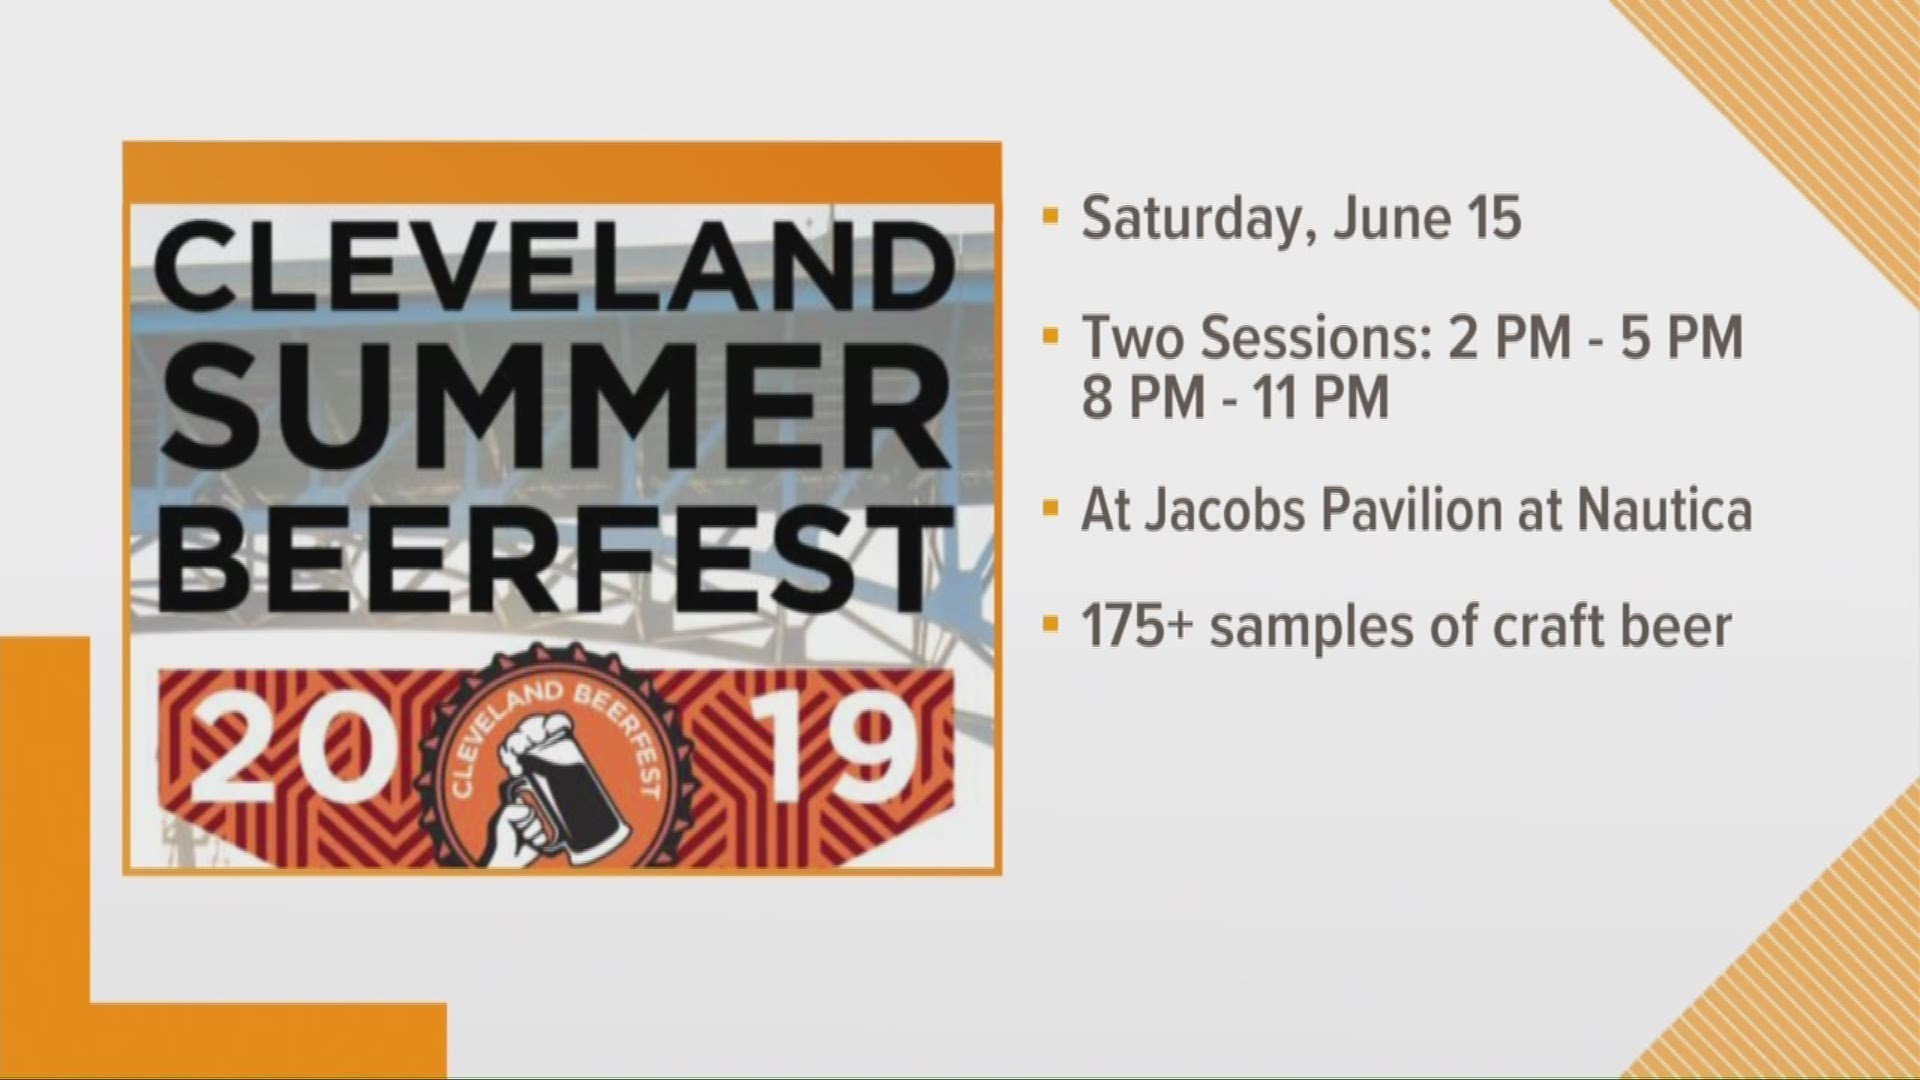 June 14, 2019: Looking for something to do this weekend? We've got you covered.